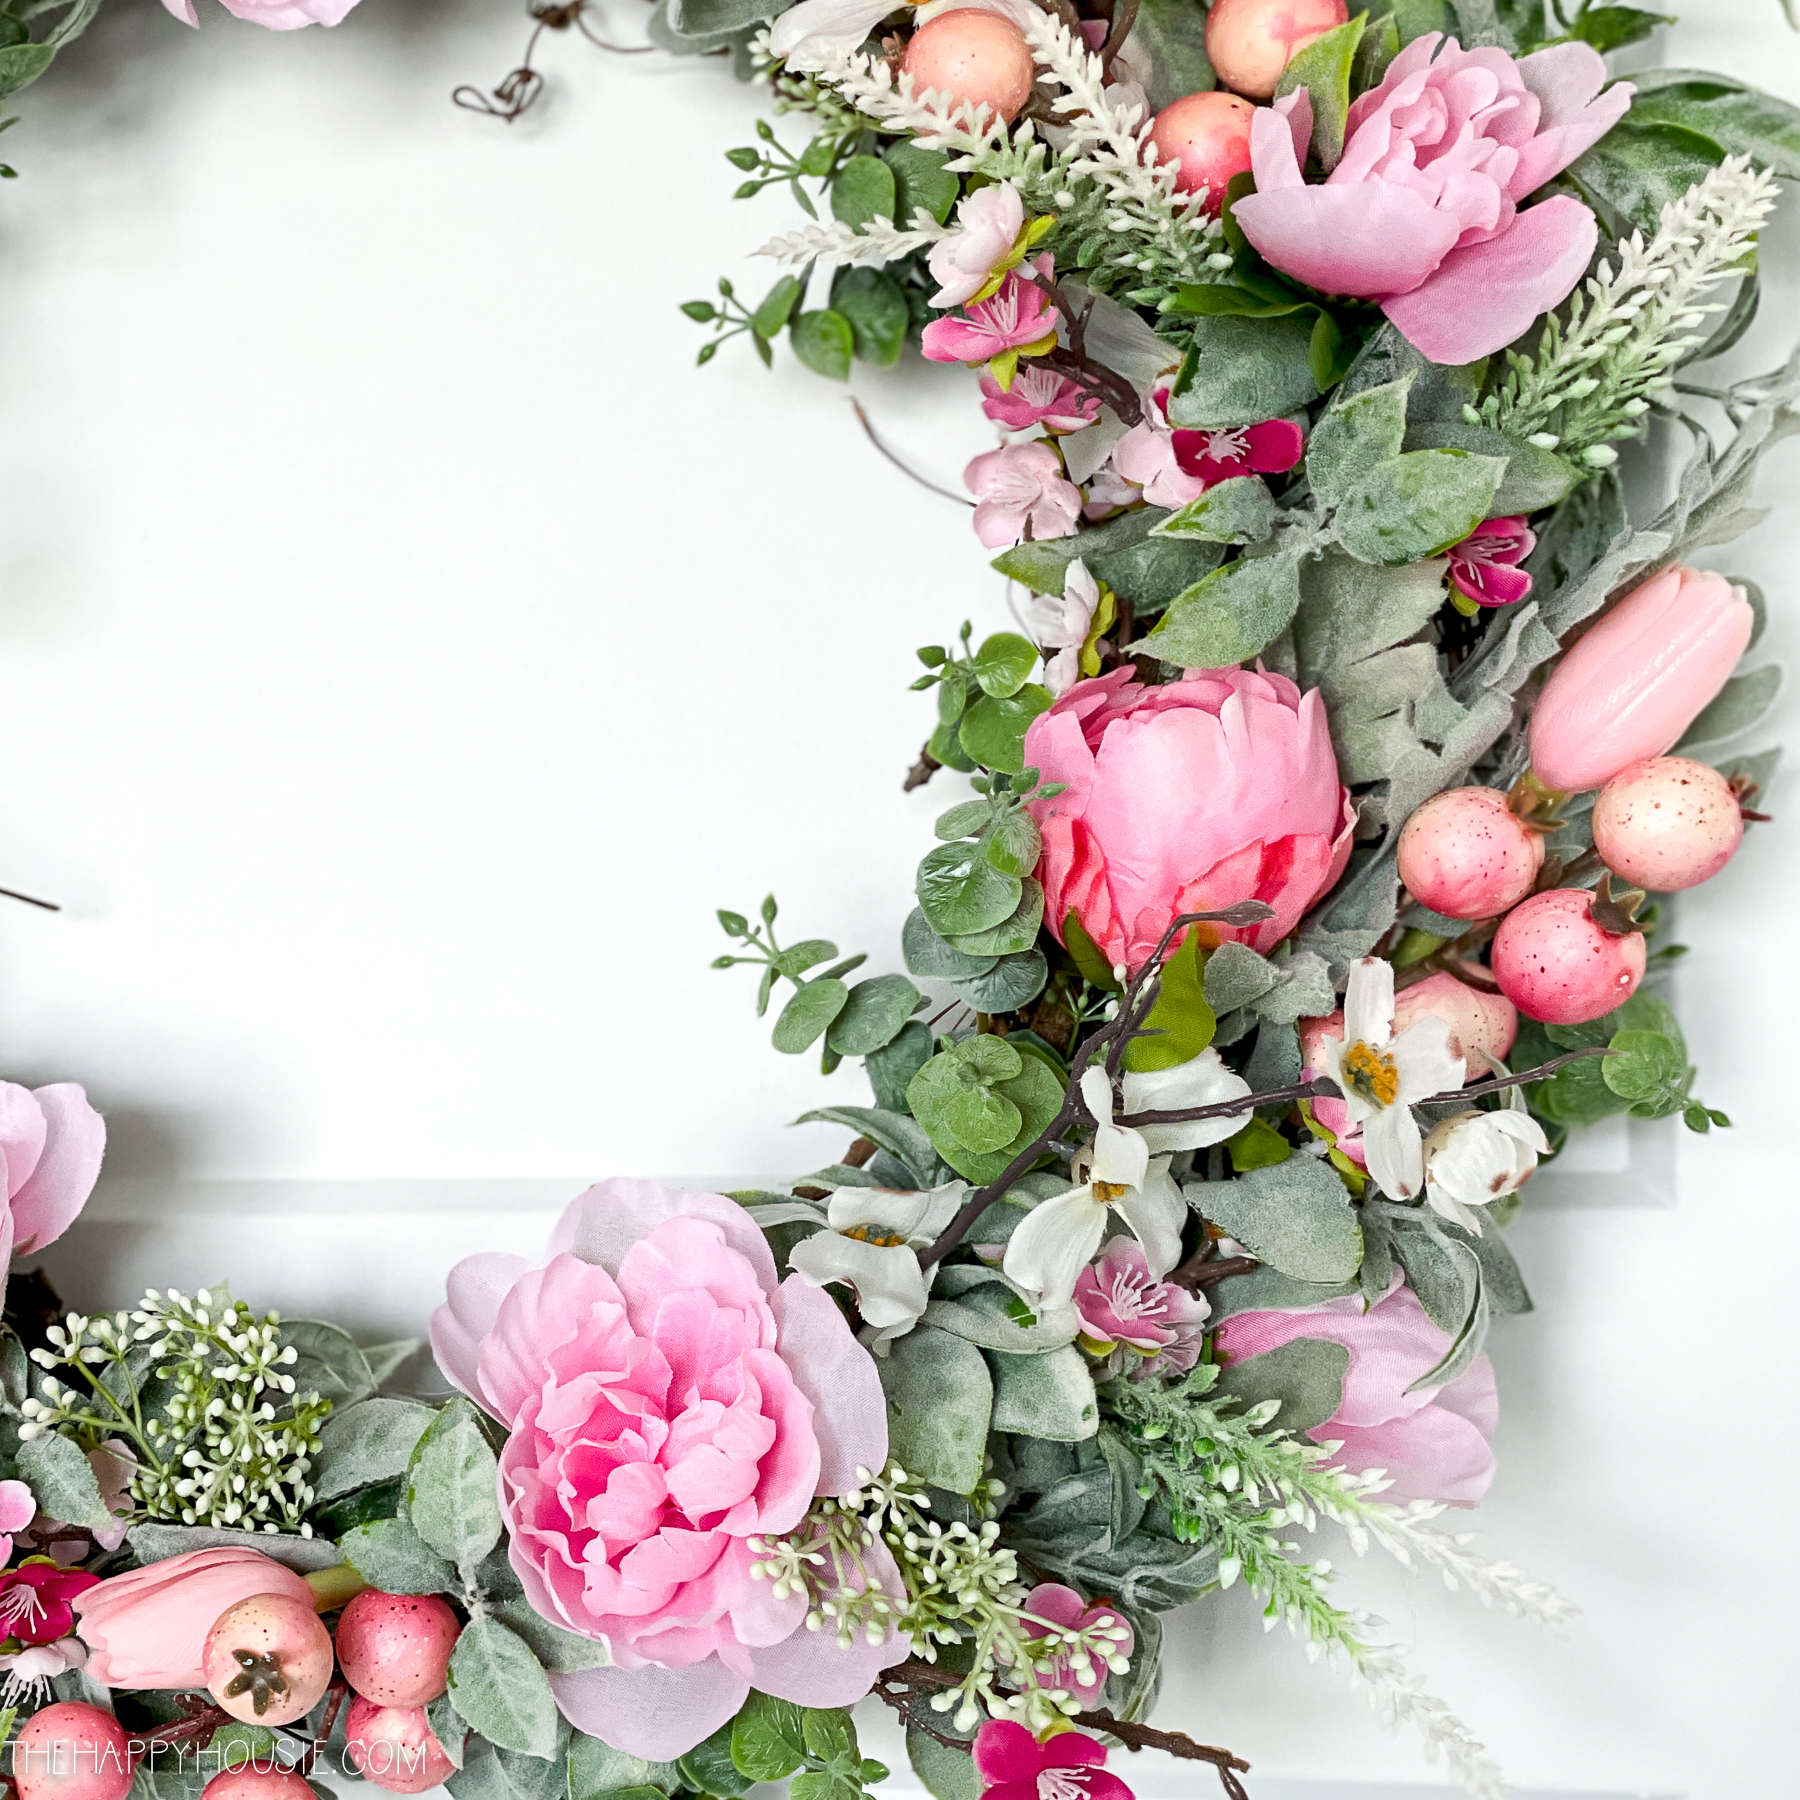 Making a Spring floral wreath for the home – Particle Press